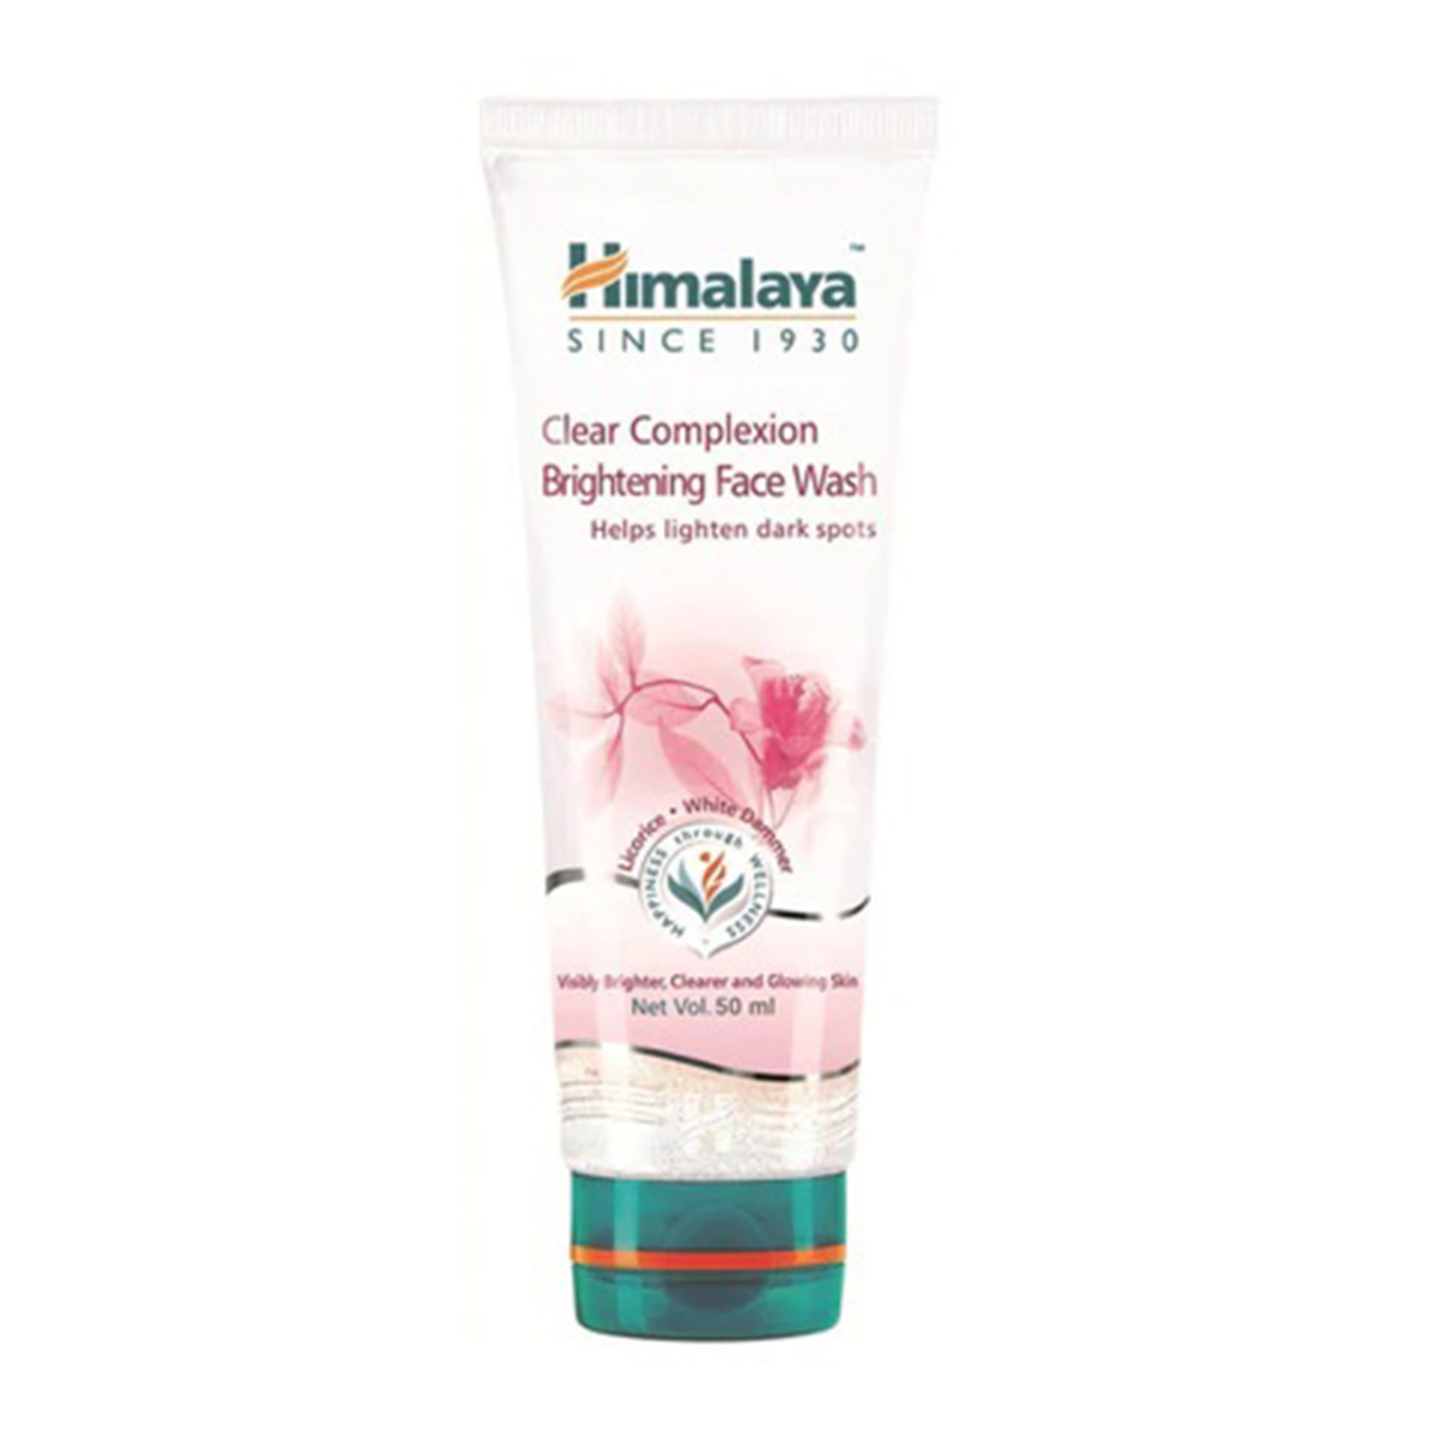 Himalaya Clear Complexion Brightening Face Wash50ml